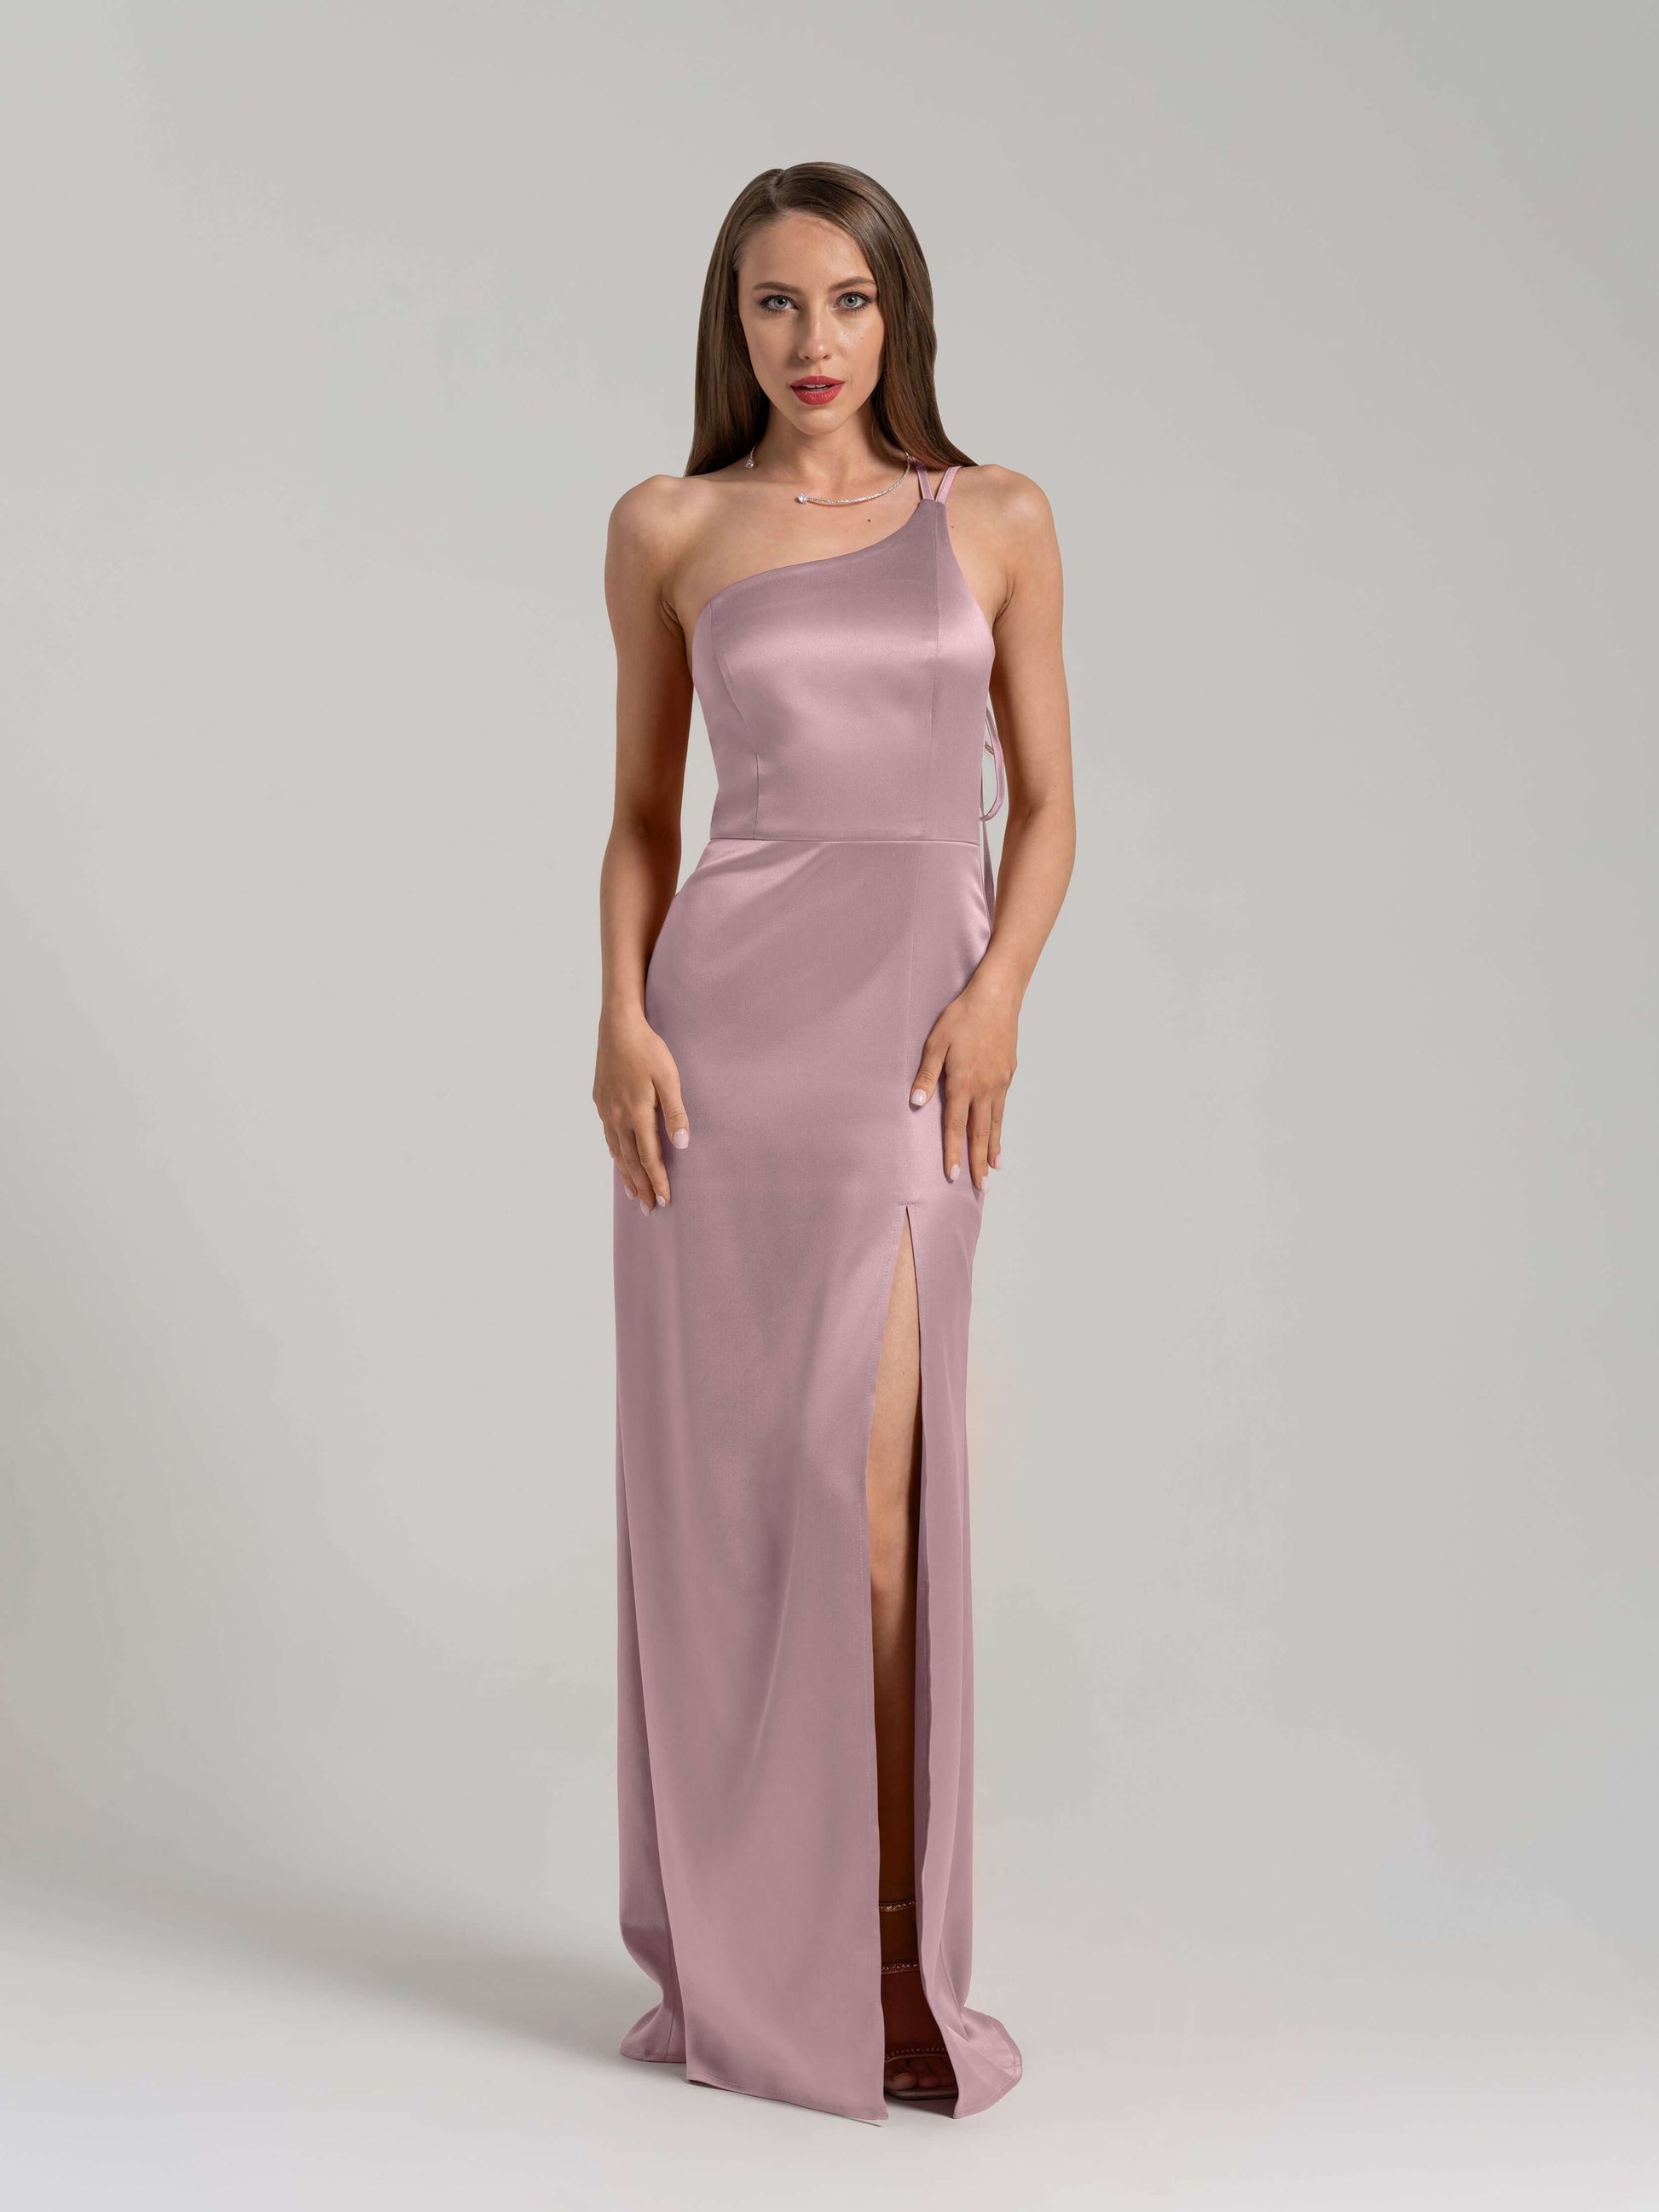 Goddess of Love Long Gown - Soft Pink by Tia Dorraine Women's Luxury Fashion Designer Clothing Brand